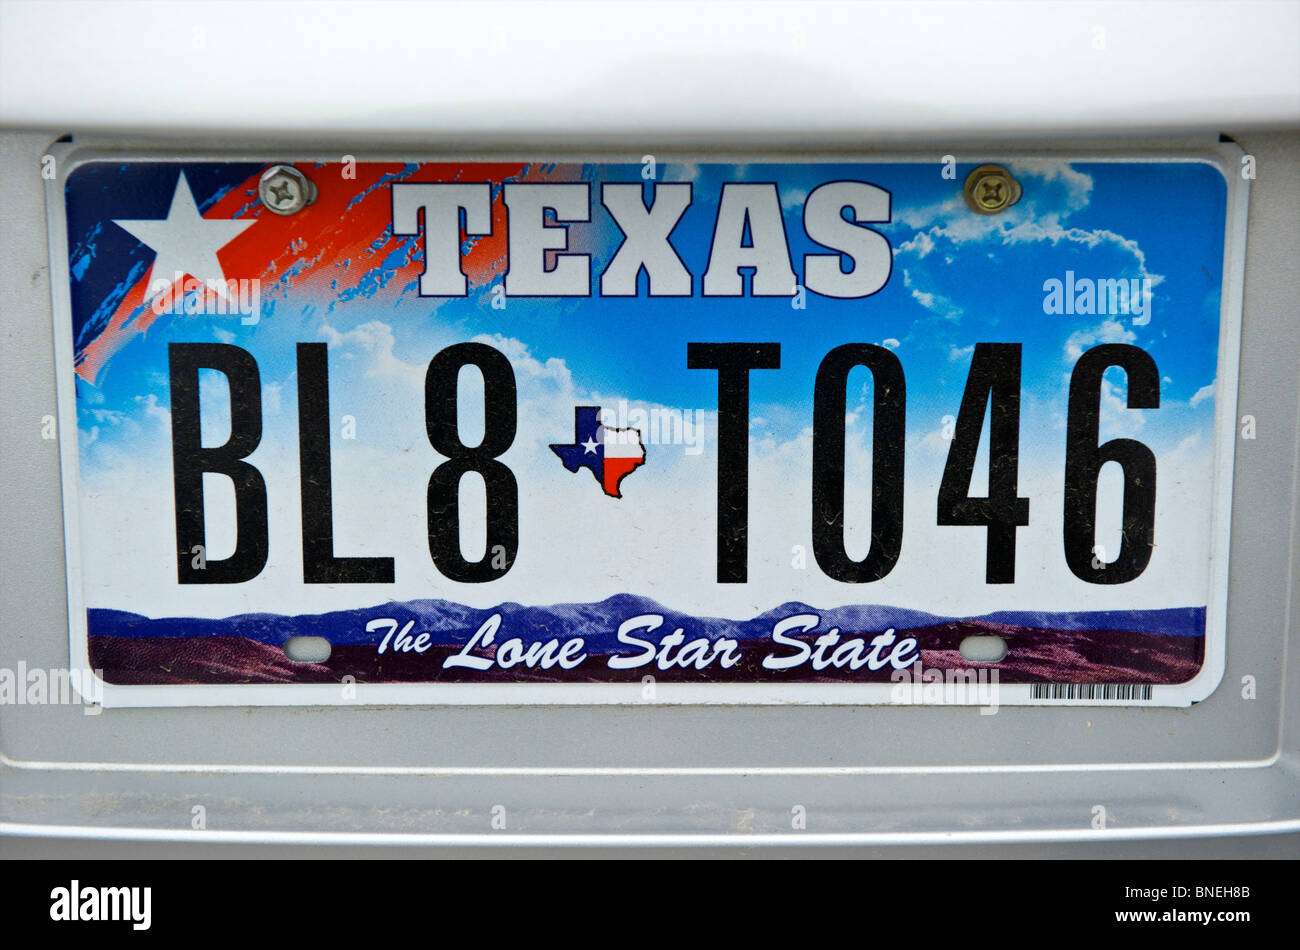 New Texas lone star state license plate, Texas, USA Stock Photo